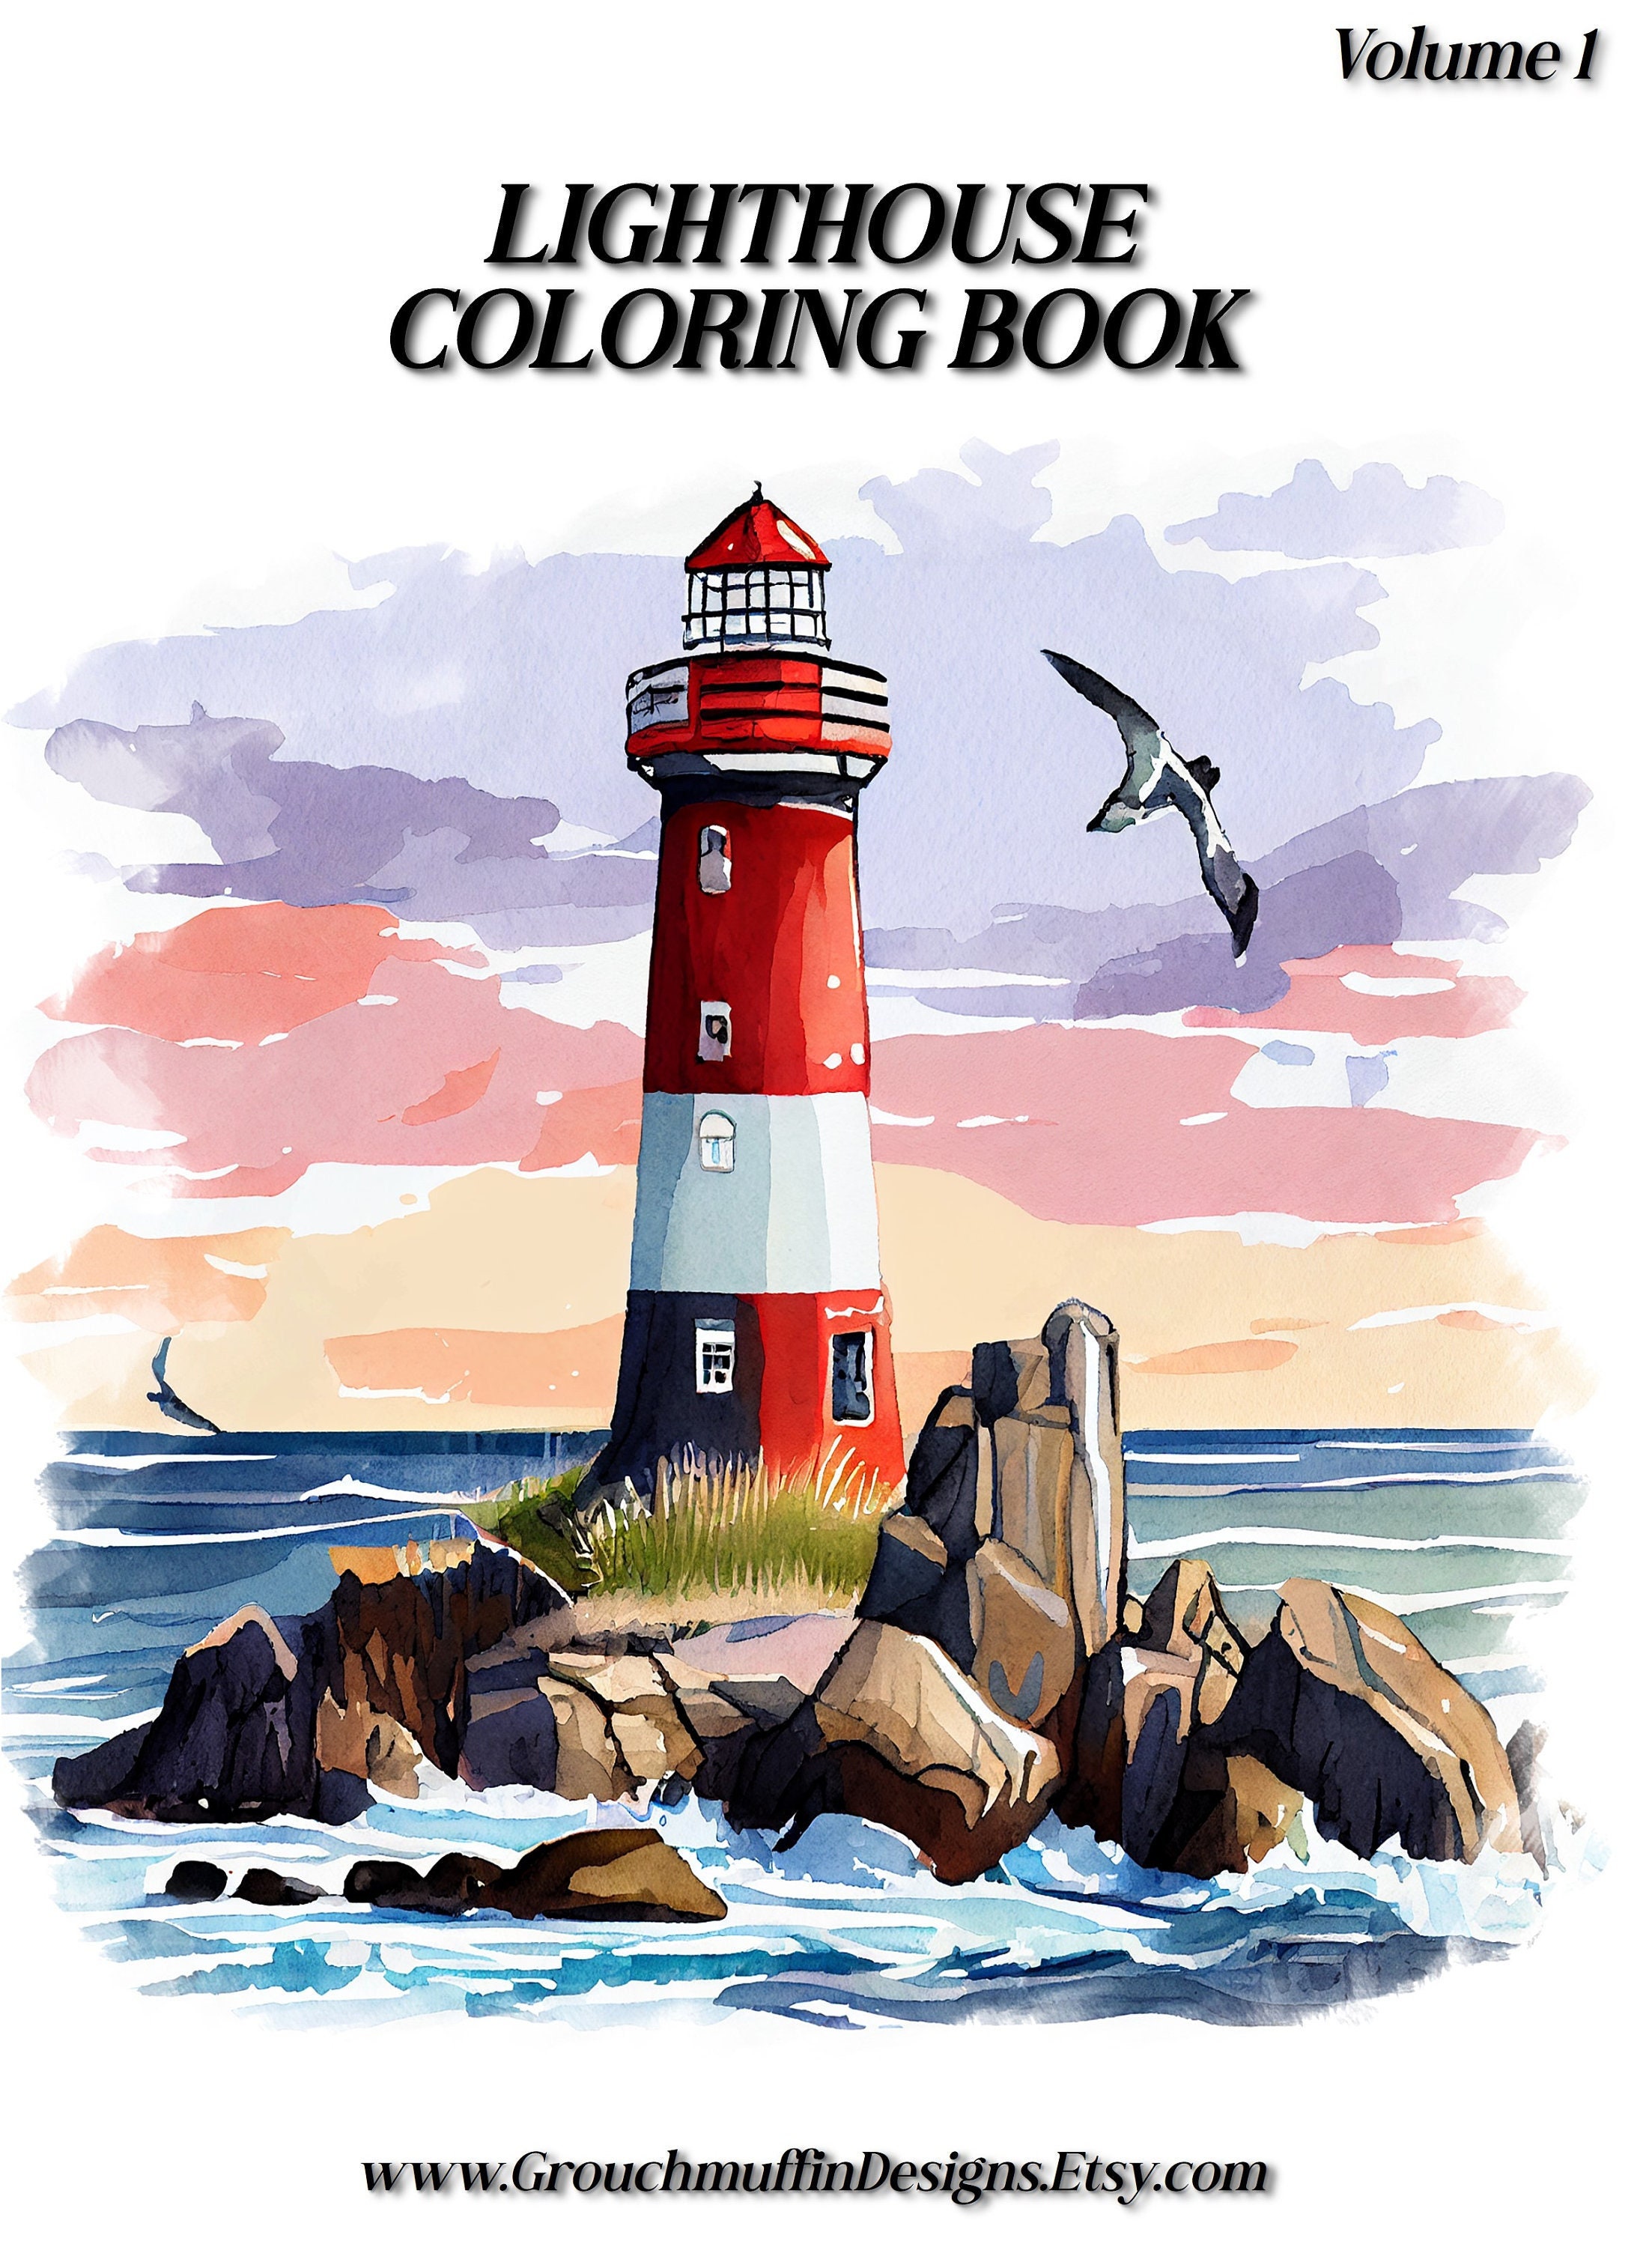 Harmony Adult Coloring Book, Coloring Book, Stress Relief, Hand